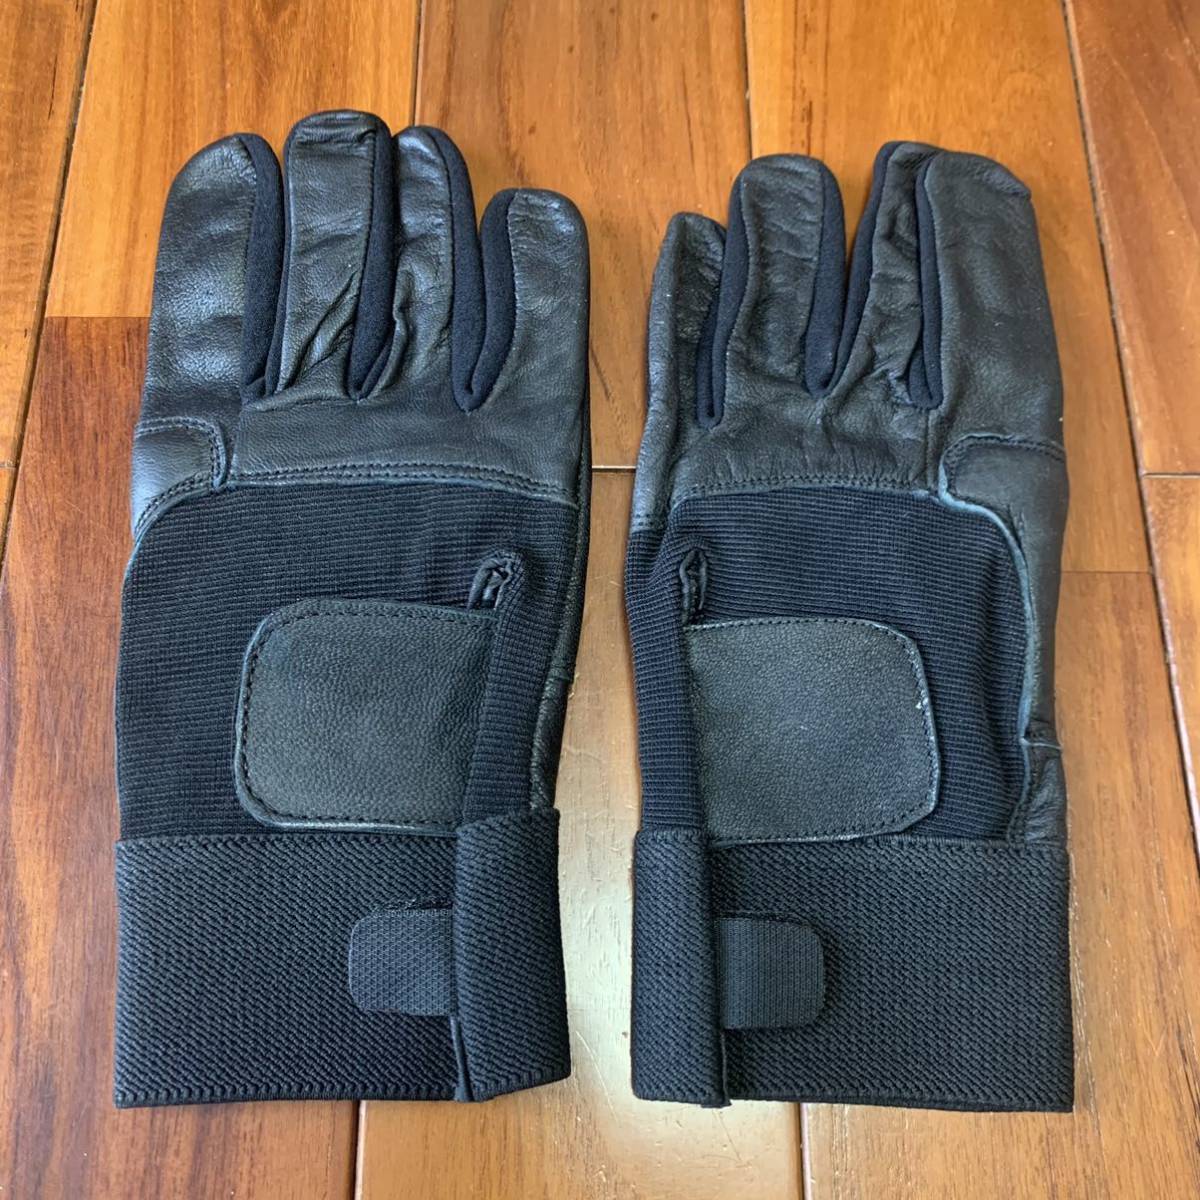  Okinawa the US armed forces discharge goods IMPACT GLOVES leather glove gloves sport cycling outdoor MEDIUM black ( control number I1)